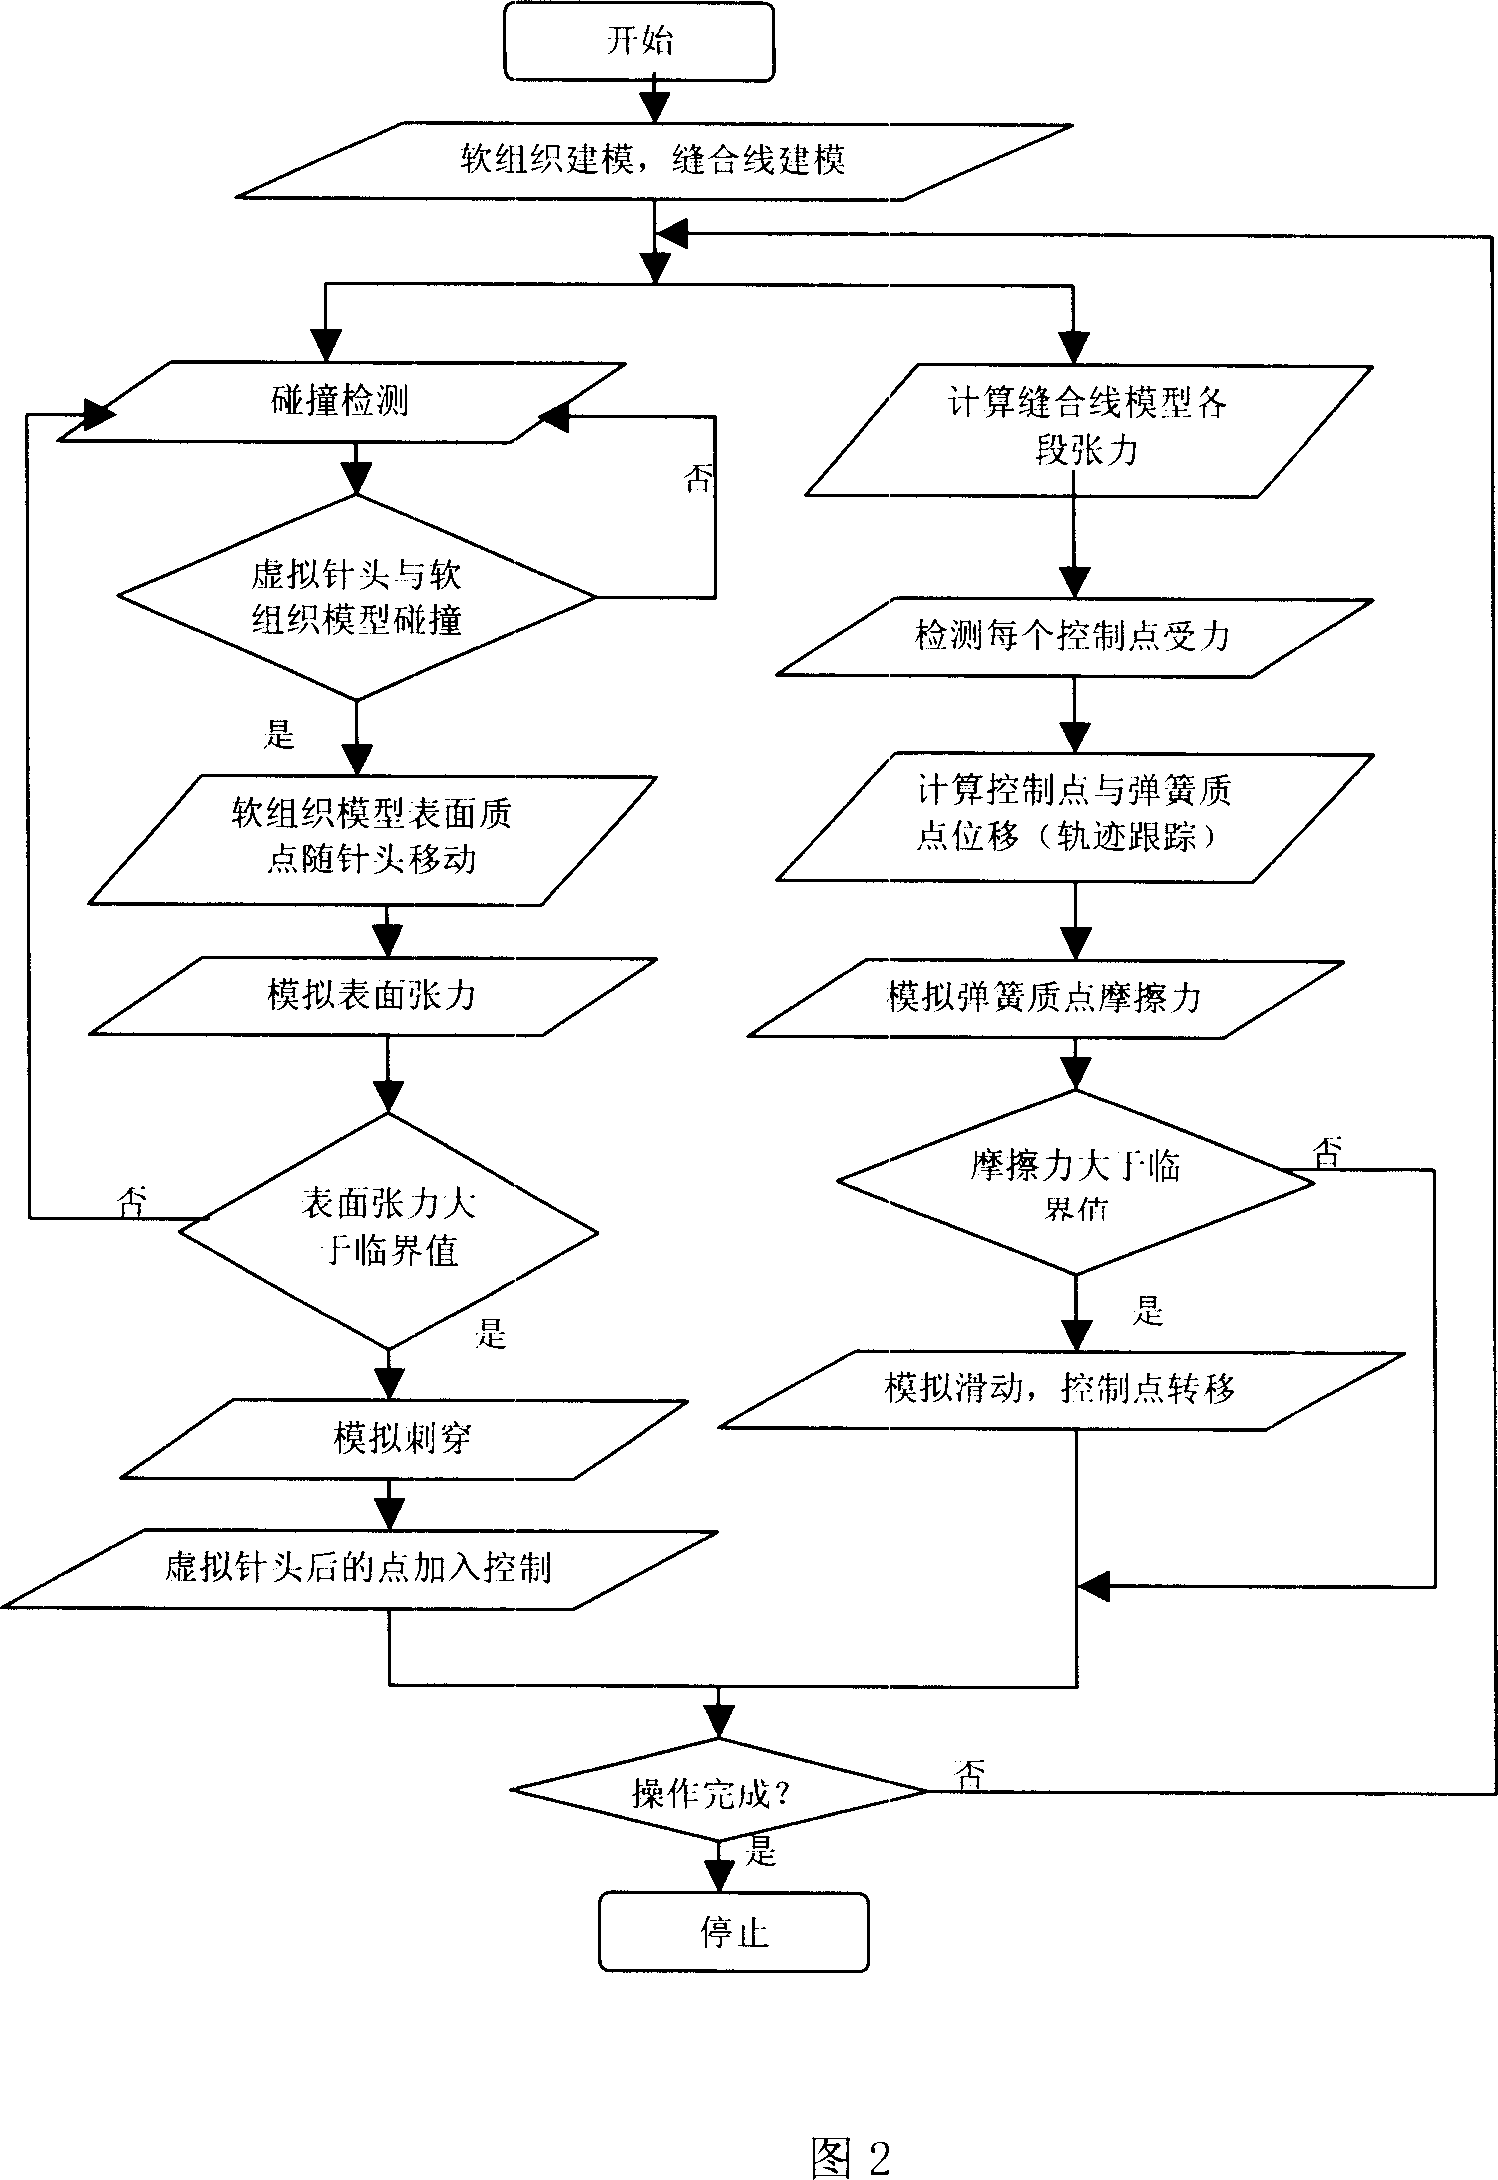 Computerized cutting and stitching analogy method based on stress analysis and deformation